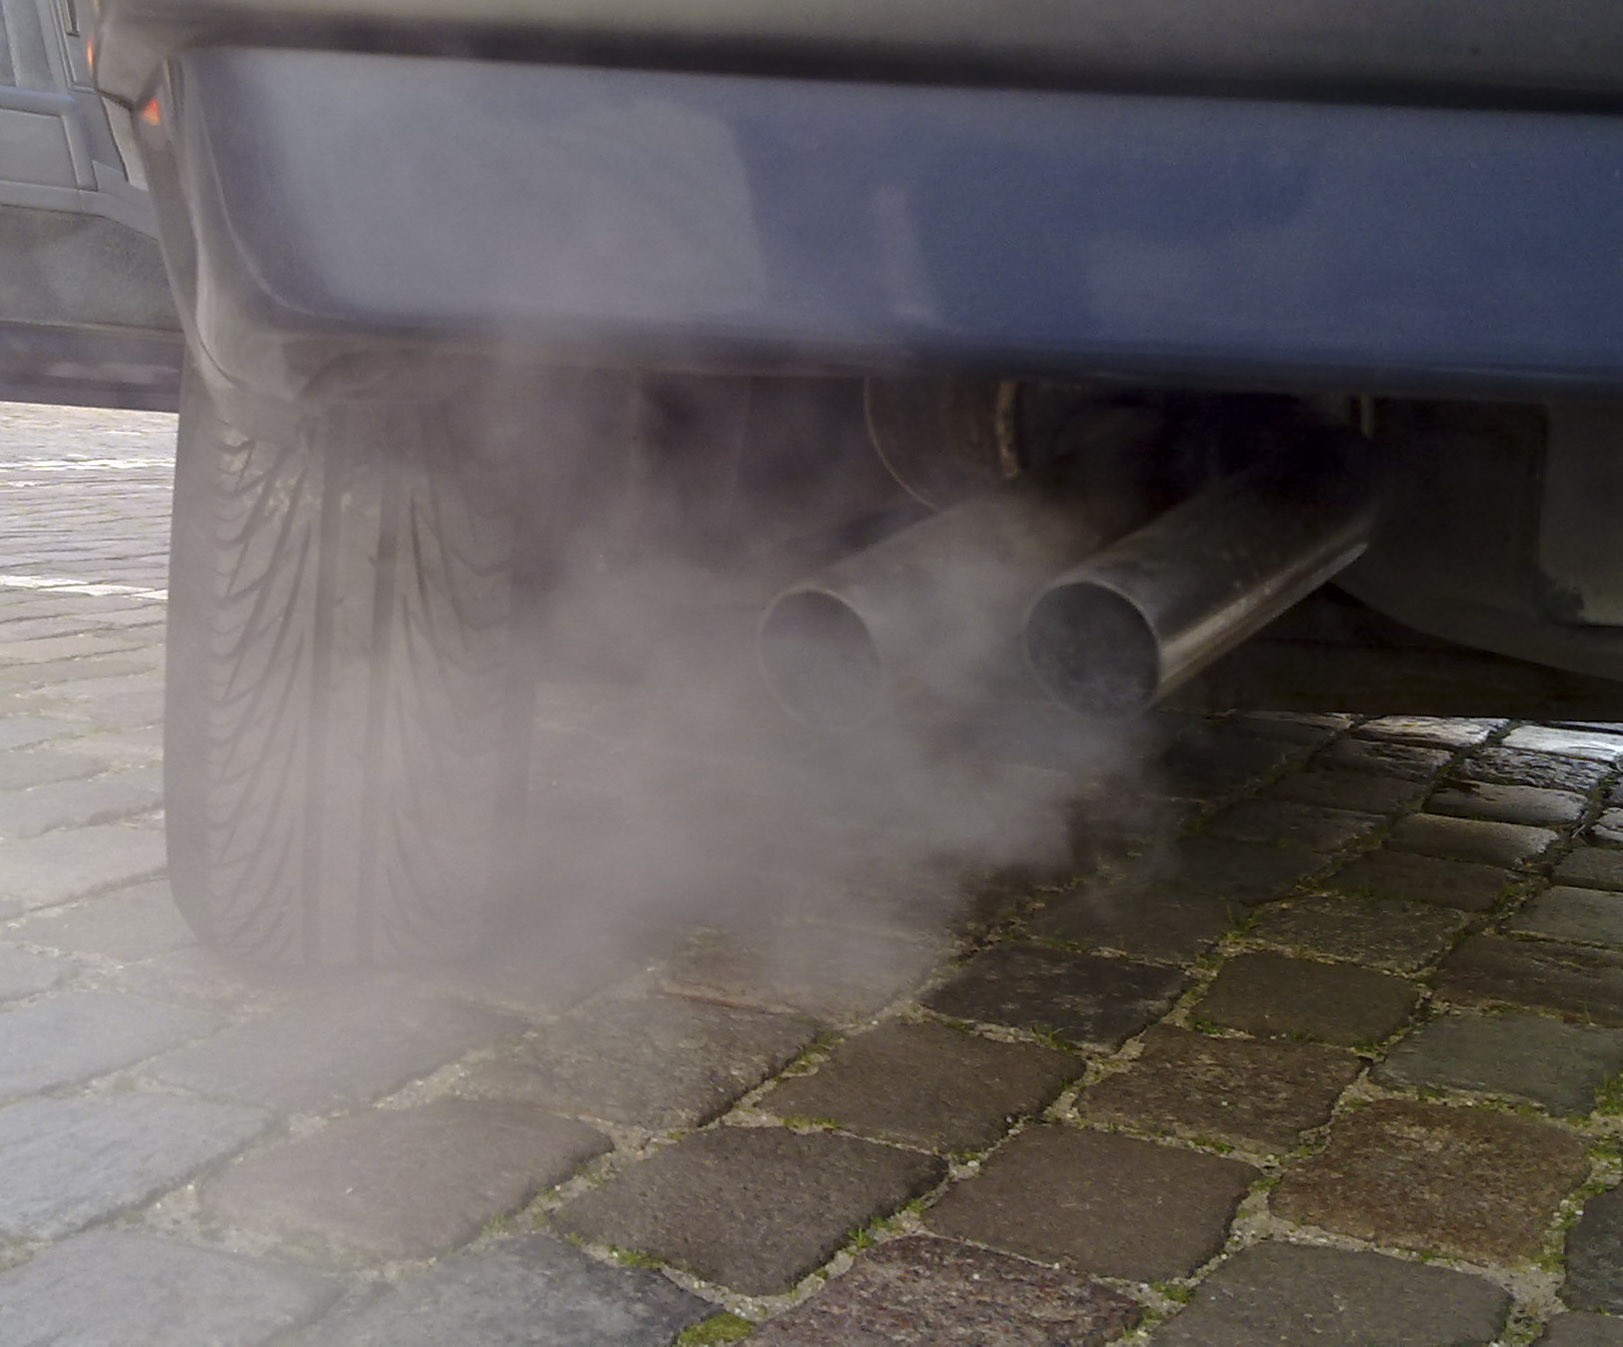 What Causes Black Smoke From Car Exhaust